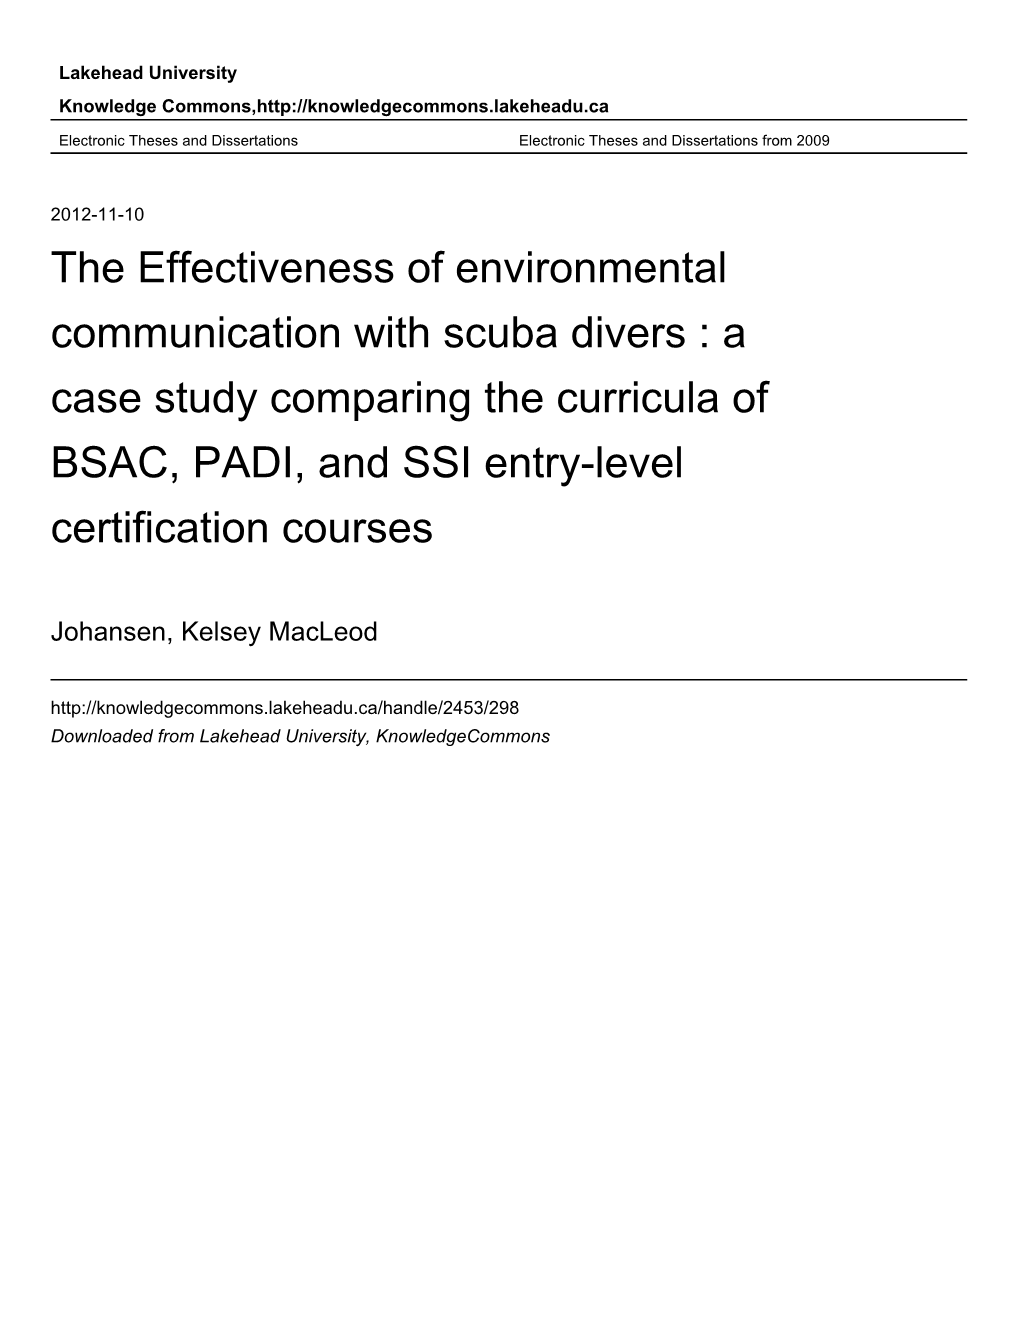 The Effectiveness of Environmental Communication with Scuba Divers : a Case Study Comparing the Curricula of BSAC, PADI, and SSI Entry-Level Certification Courses